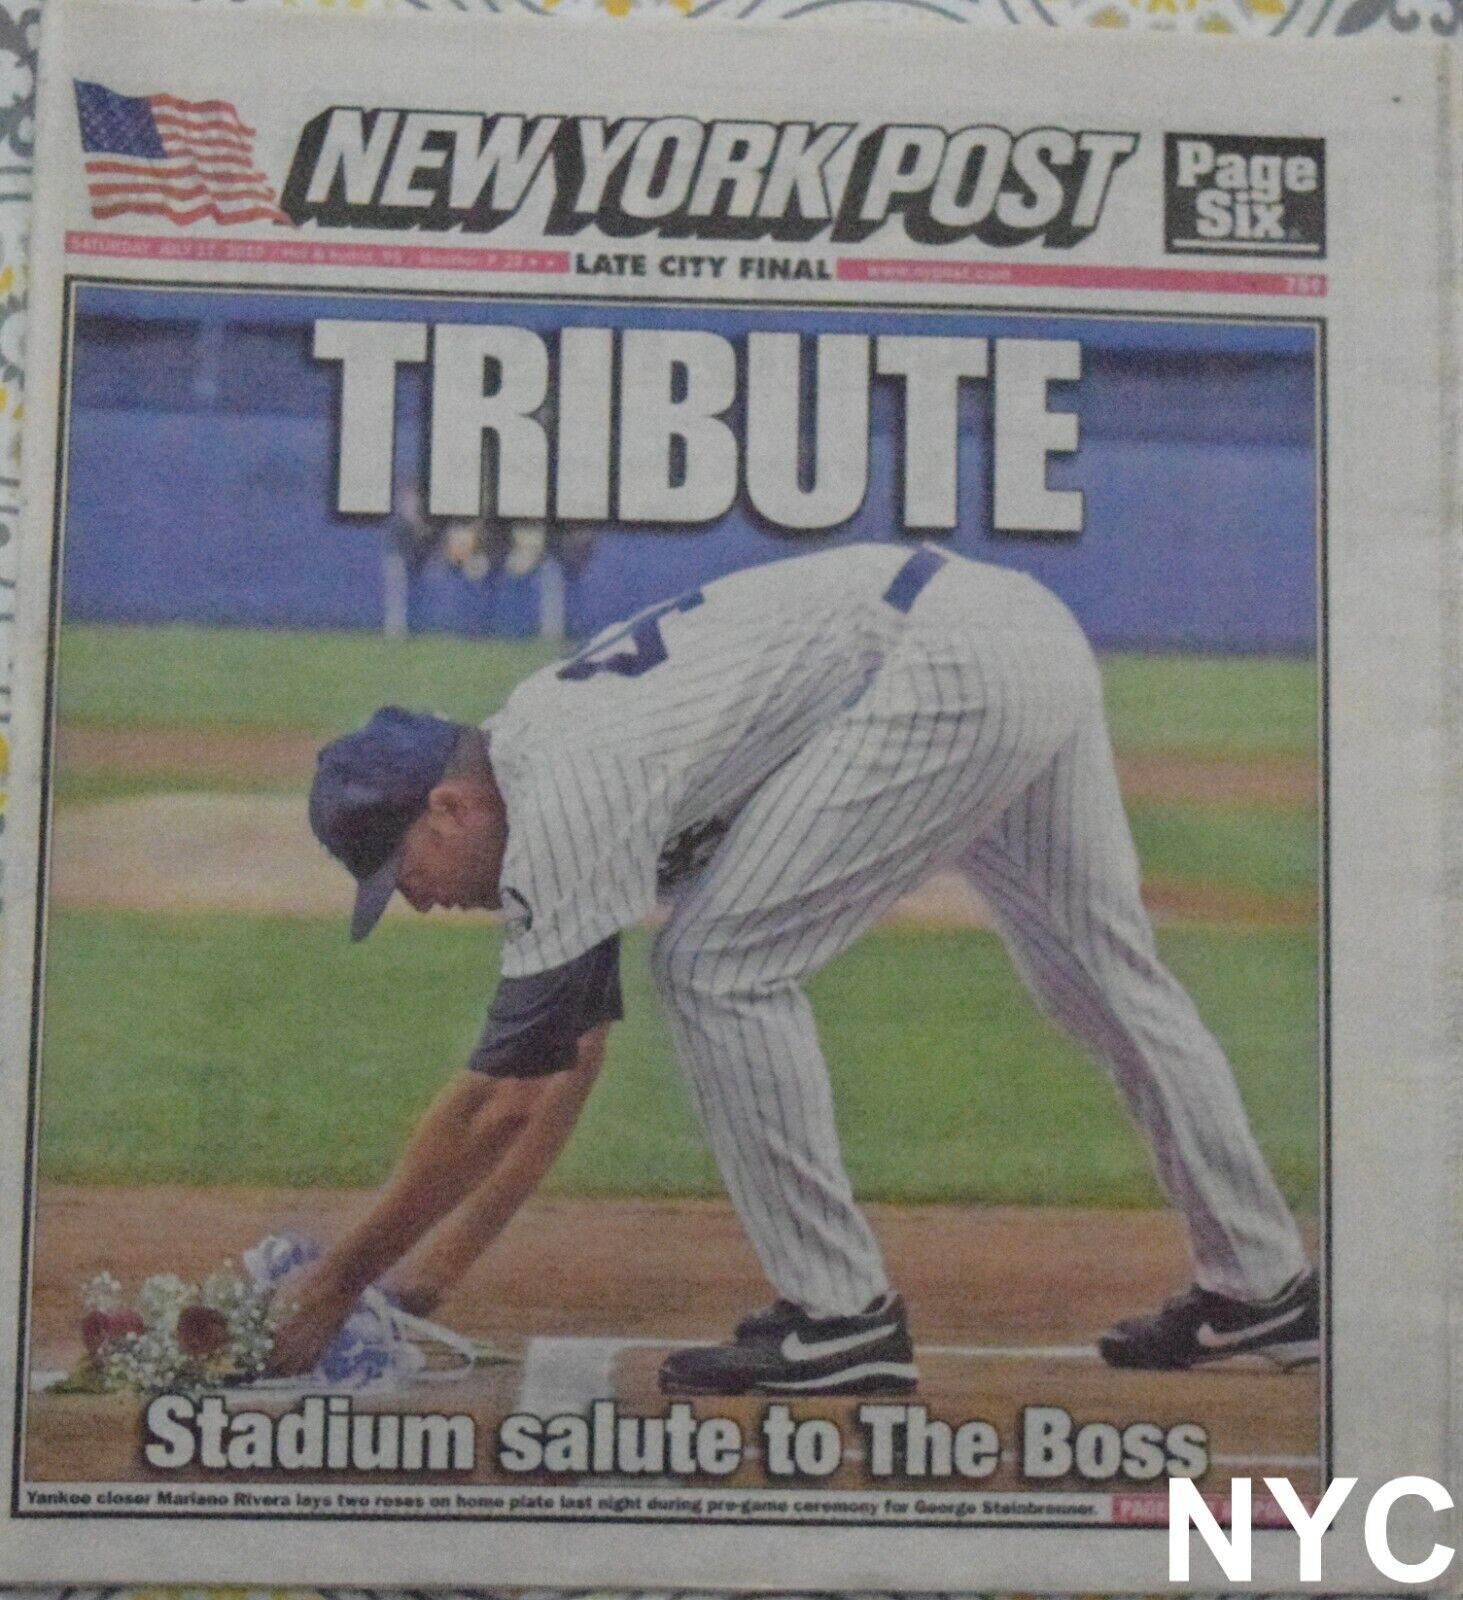 Mariano Rivera Tribute To George Steinbrenner New York Post July 17 2010